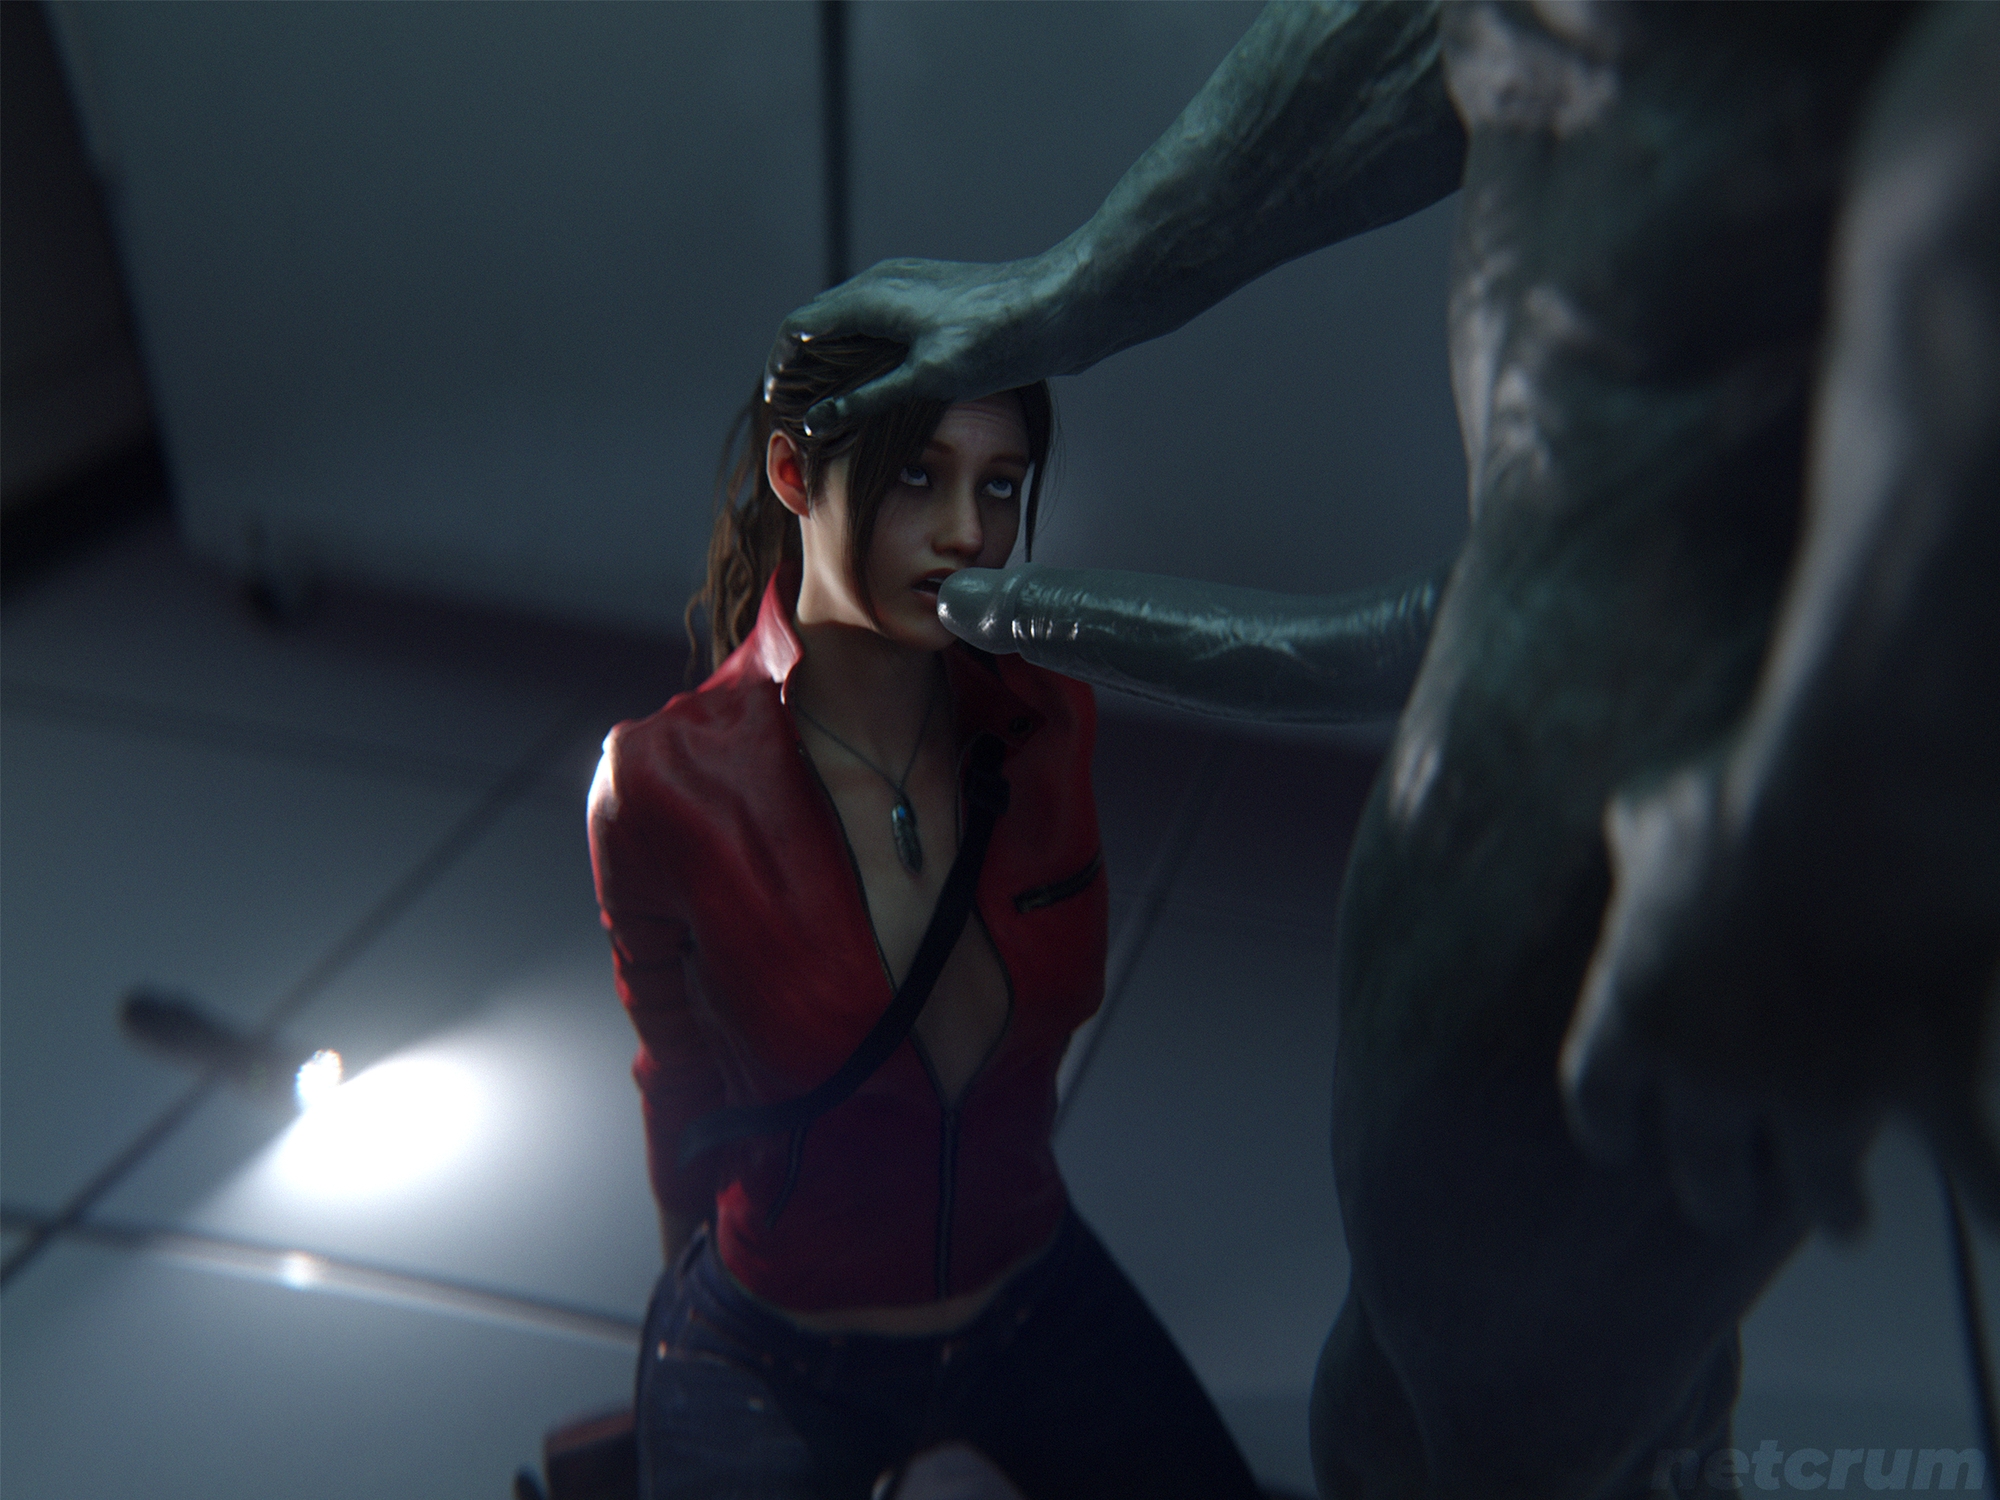 Claire Gets Caught Sneaking Where she Shouldn t Claire Redfield Resident Evil Resident Evil 2 Resident Evil 2 Remake Blowjob Big Cock Boobs Natural Boobs Big Dick Captured Caption Forced Forced Oral 2